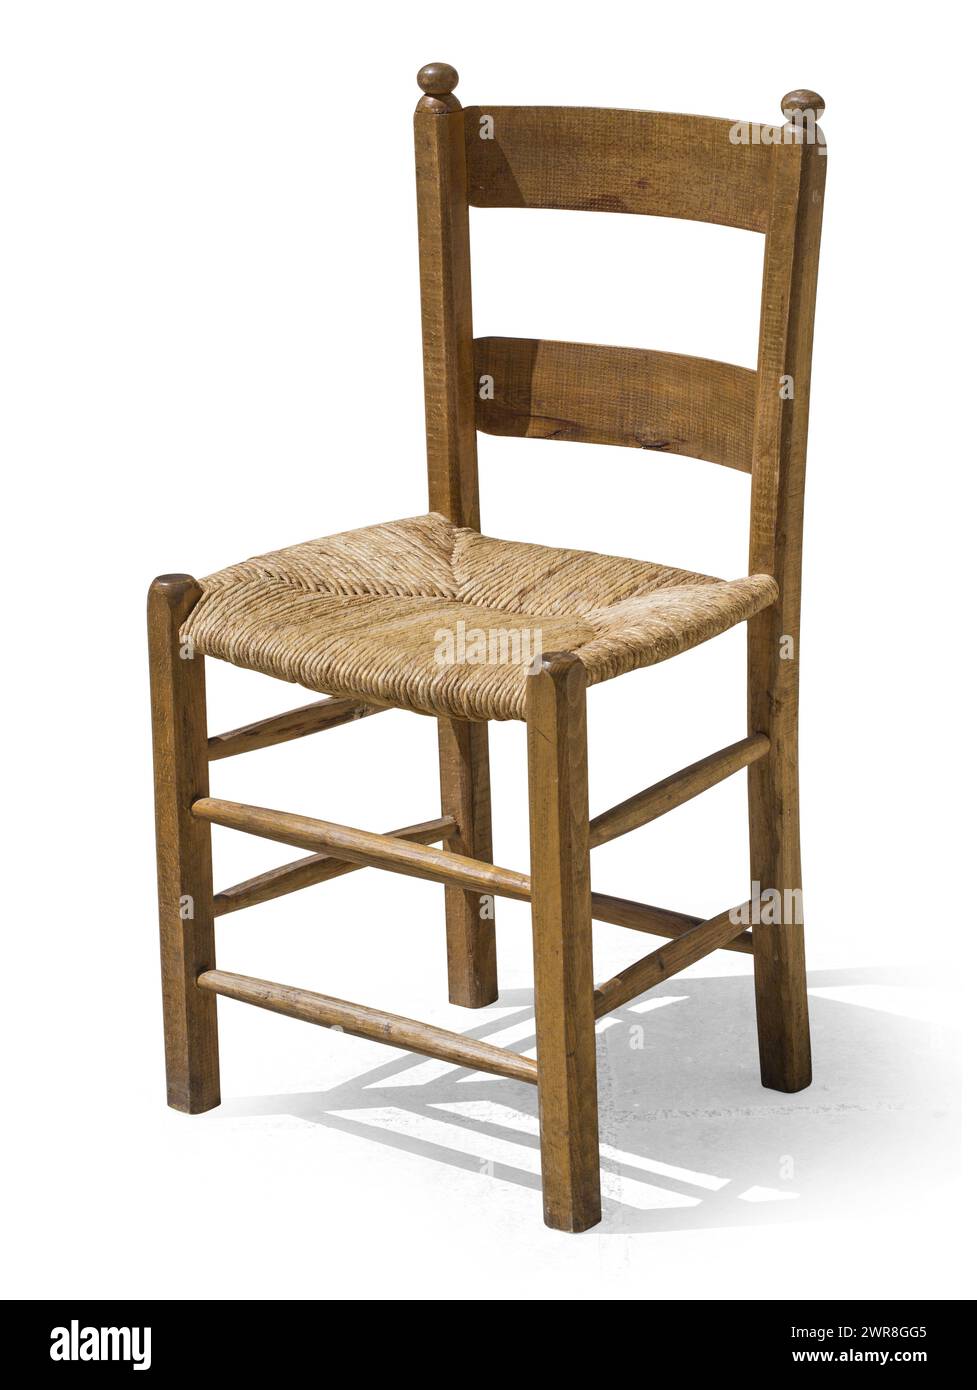 Antique Wooden Chair isolated on white with clipping path Stock Photo